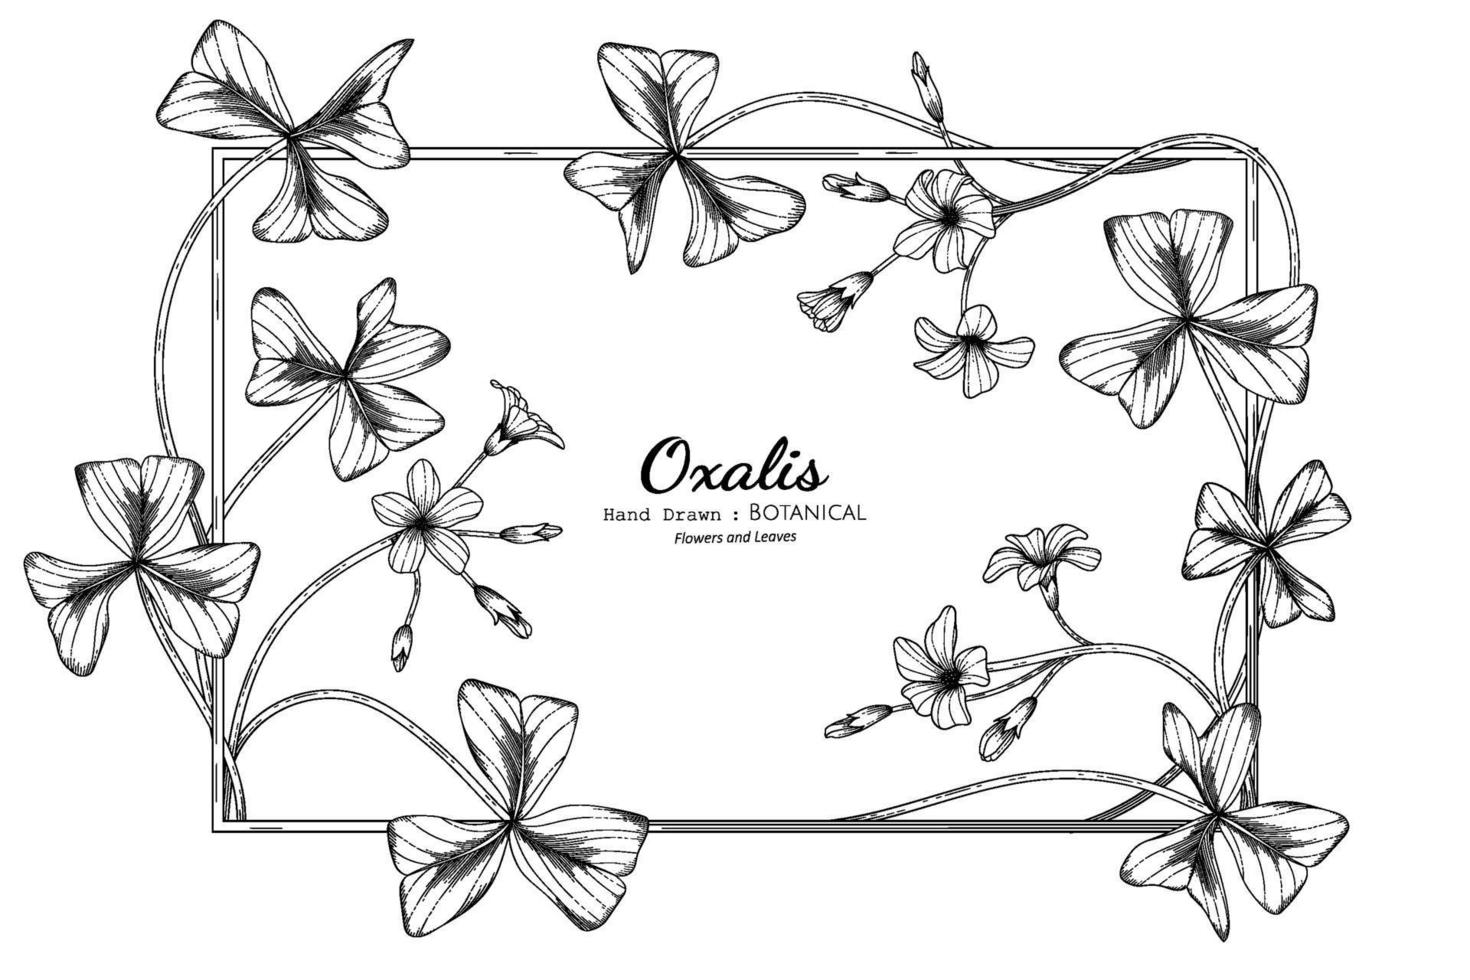 Oxalis flower and leaf hand drawn botanical illustration with line art. vector